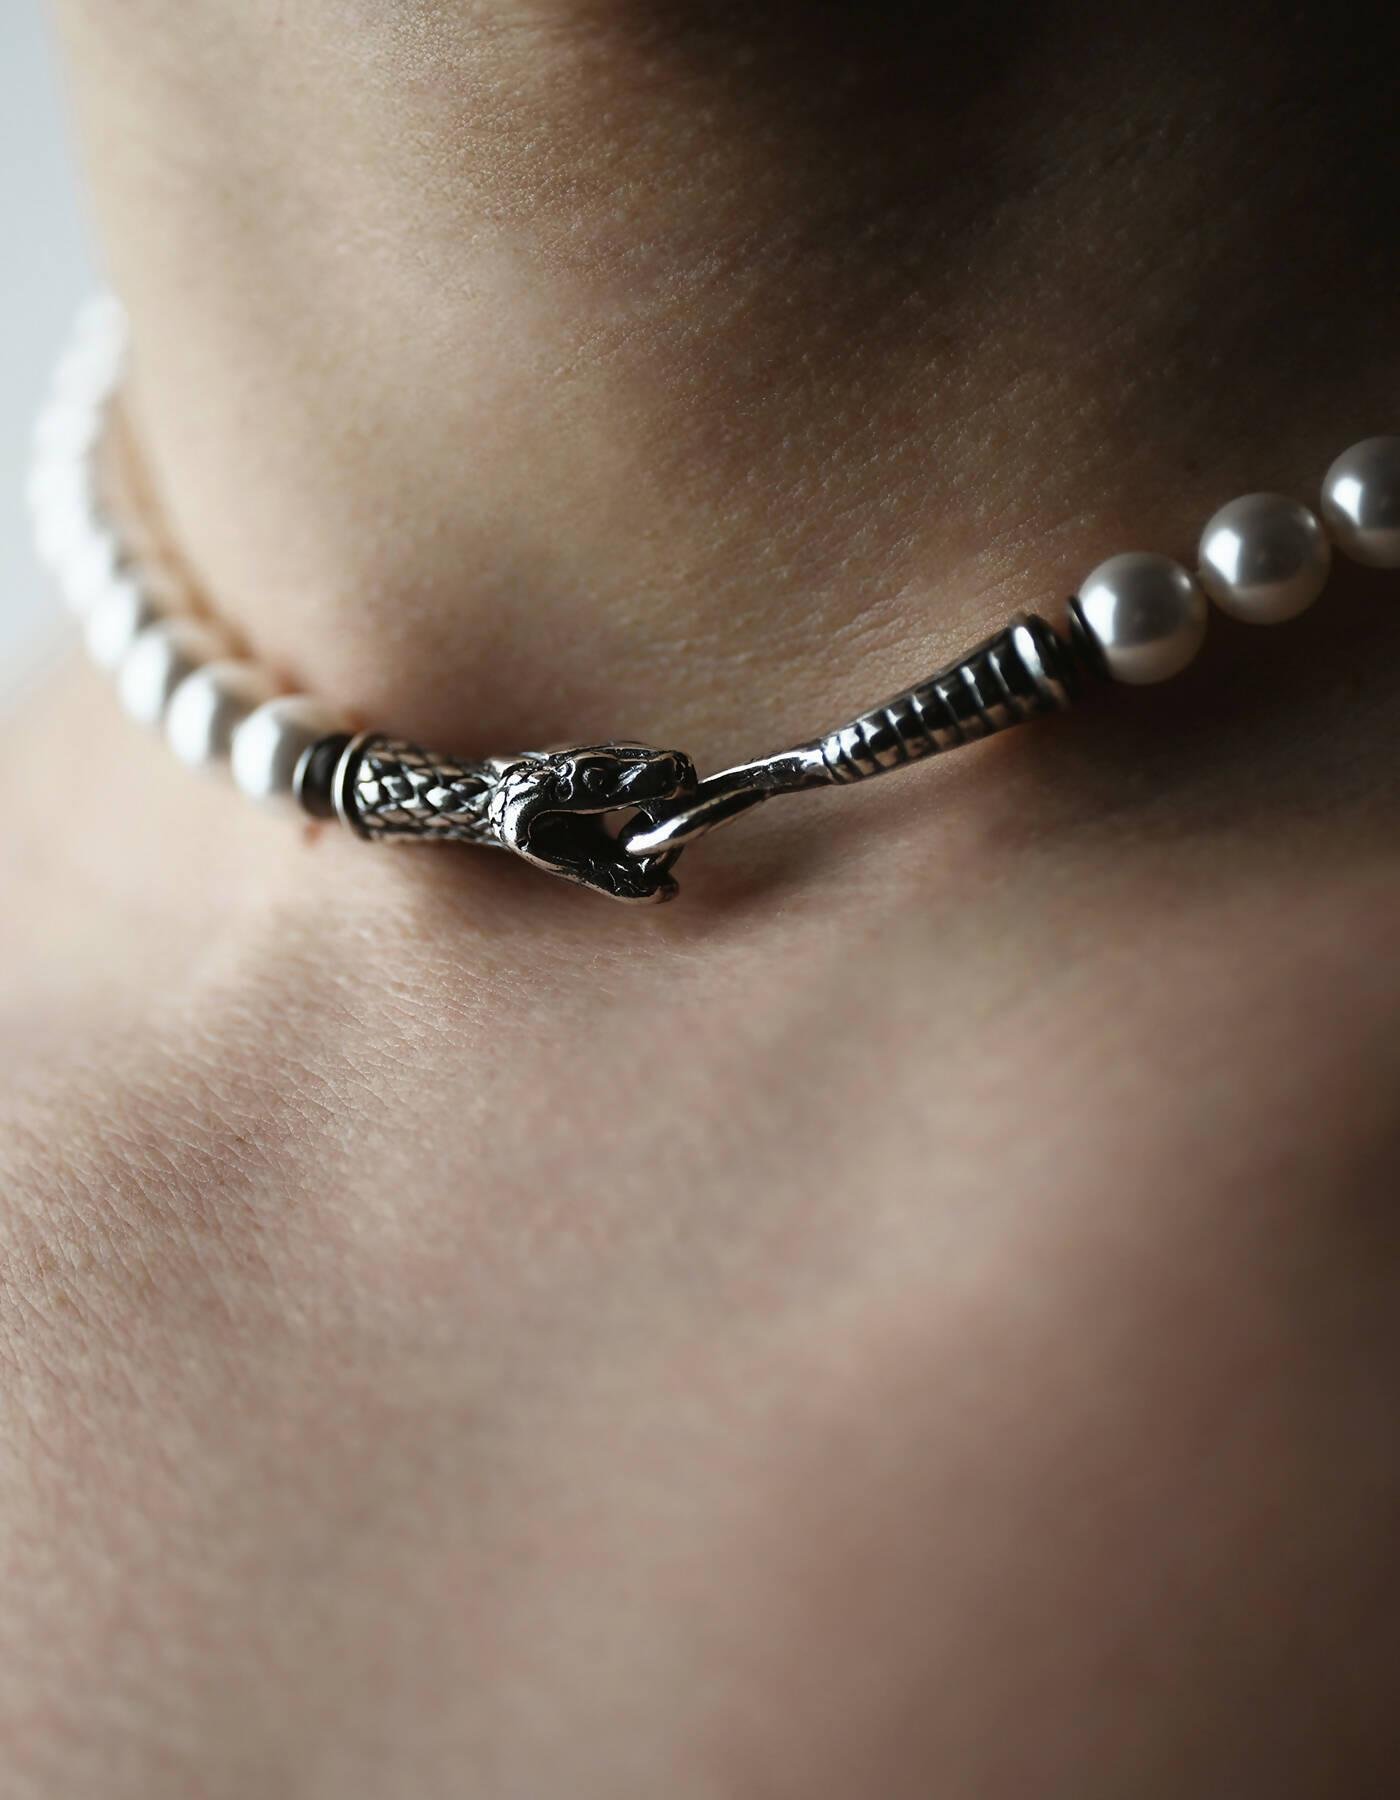 OPHIDIAN CHOKER by MACABRE GADGETS